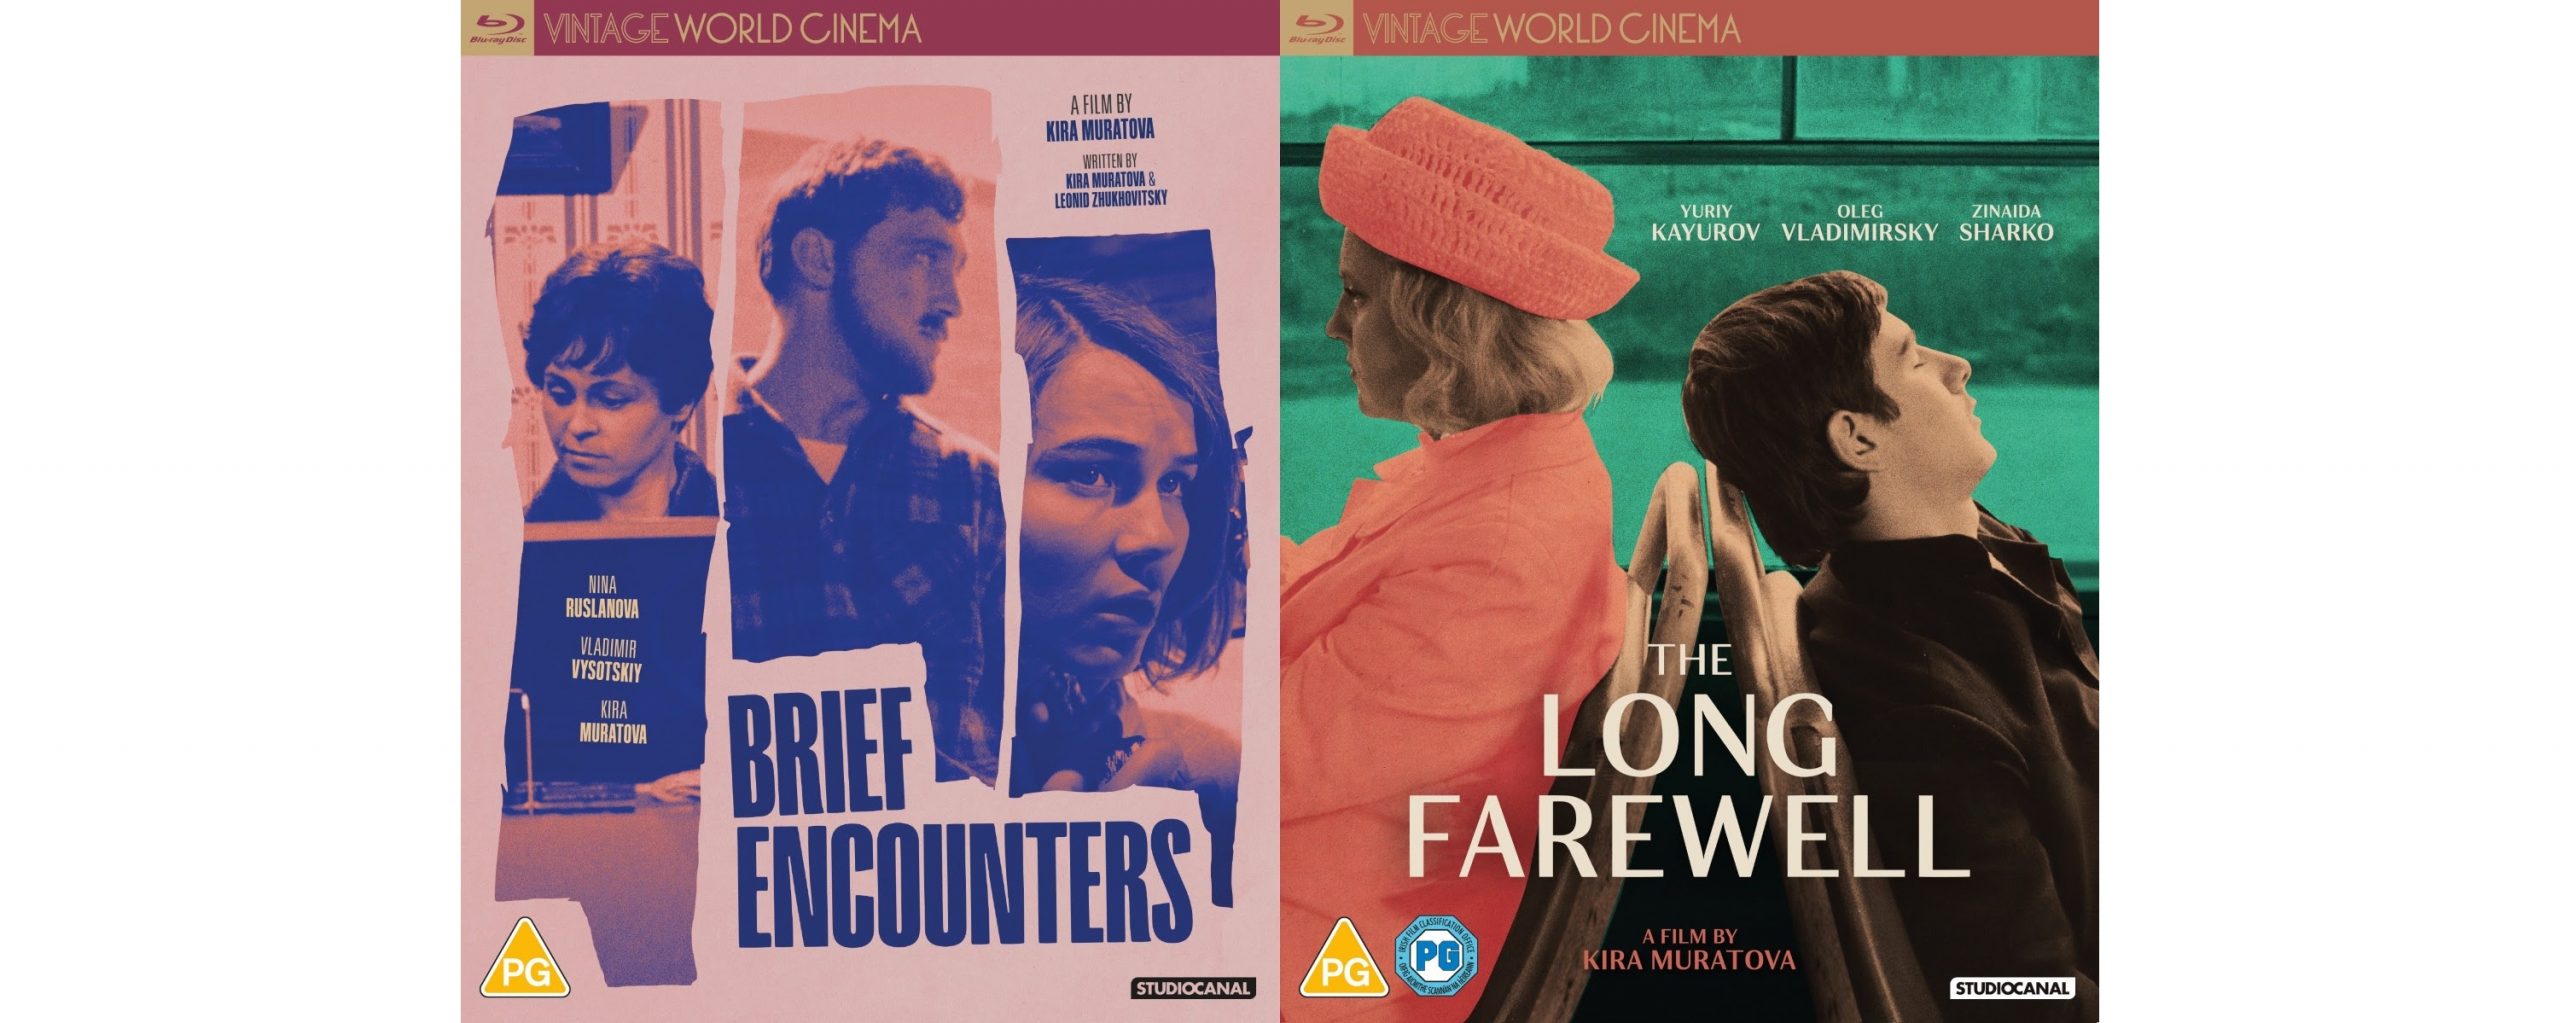 Brief Encounters & The Long Farewell